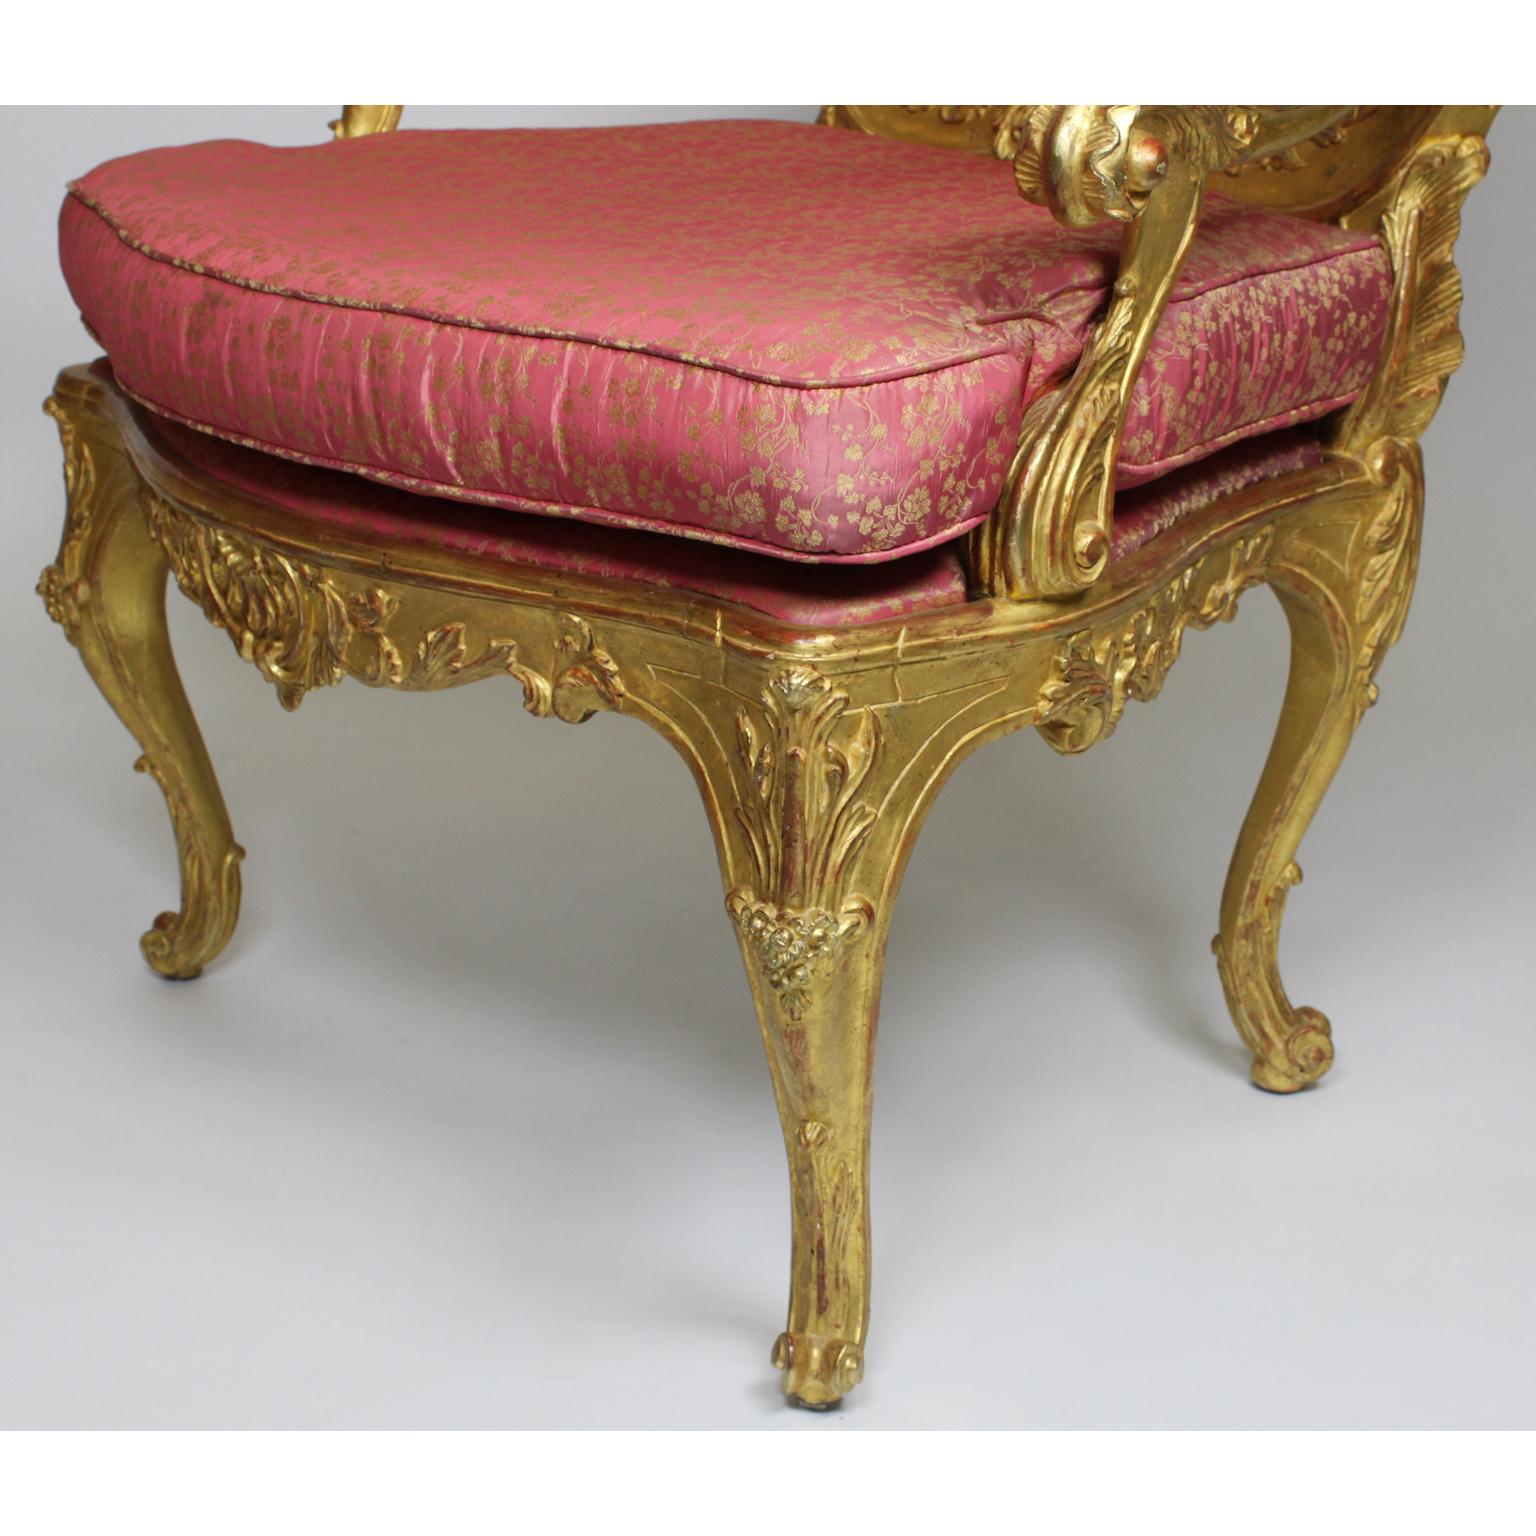 Pair of Italian Venetian Rococo Revival Style Giltwood Carved Throne Armchairs For Sale 5